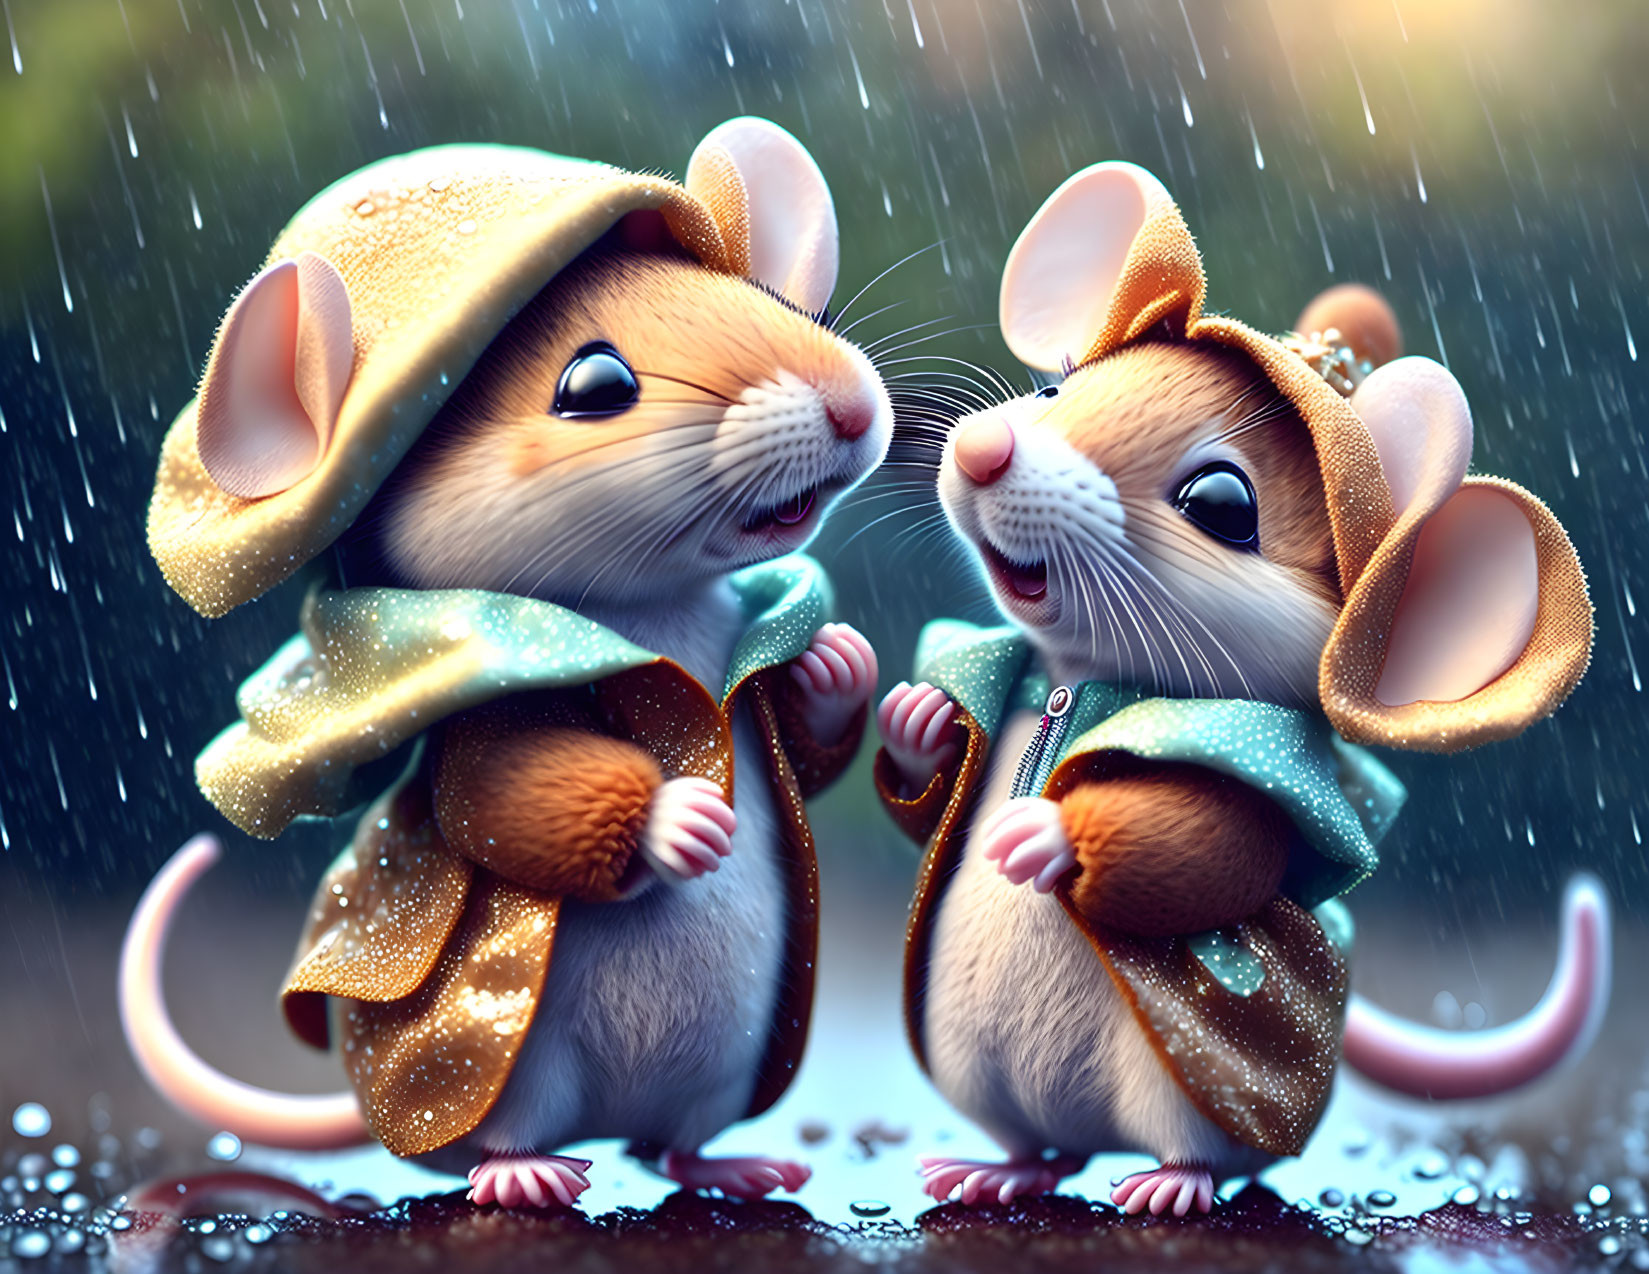 Two mice in raincoats holding hands in the rain